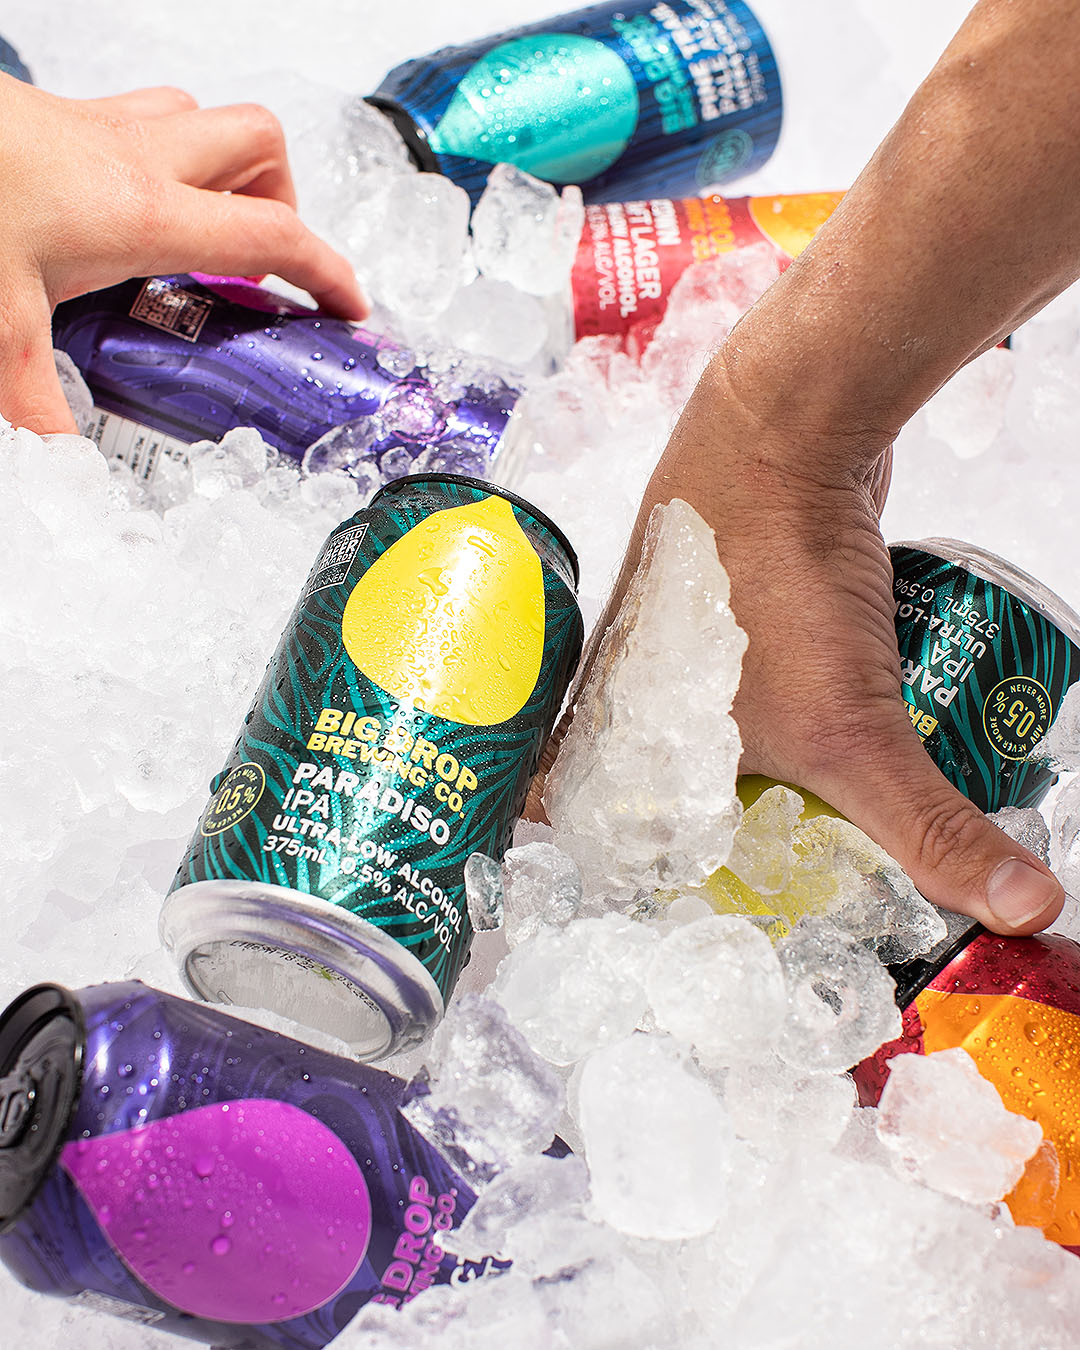 Hands dive into ice to retrieve their Big Drop Brewing beers.